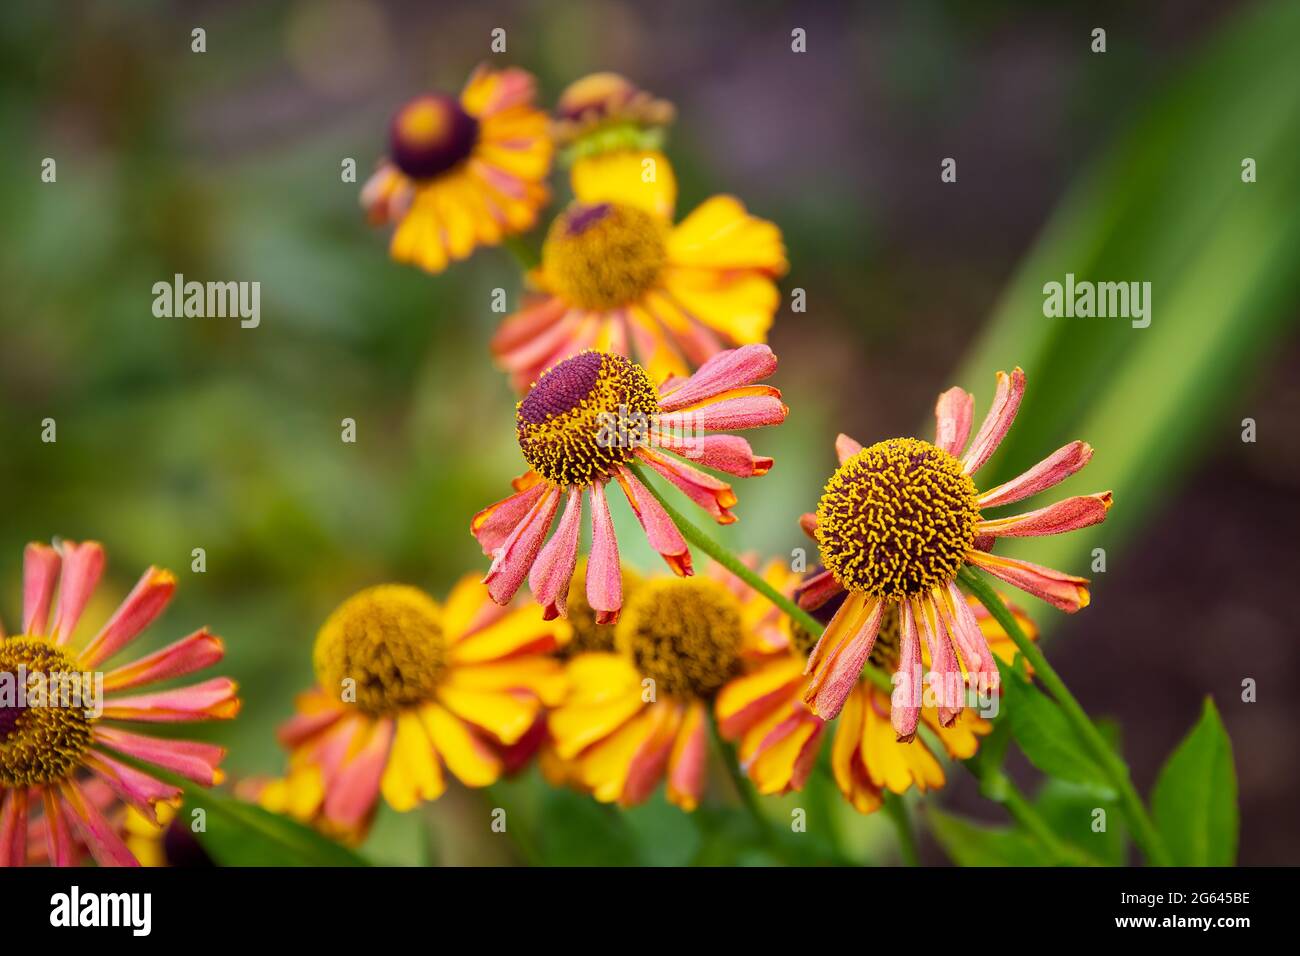 Colourful summer flowering Helenium flowers also known as Sneezeweed Stock Photo